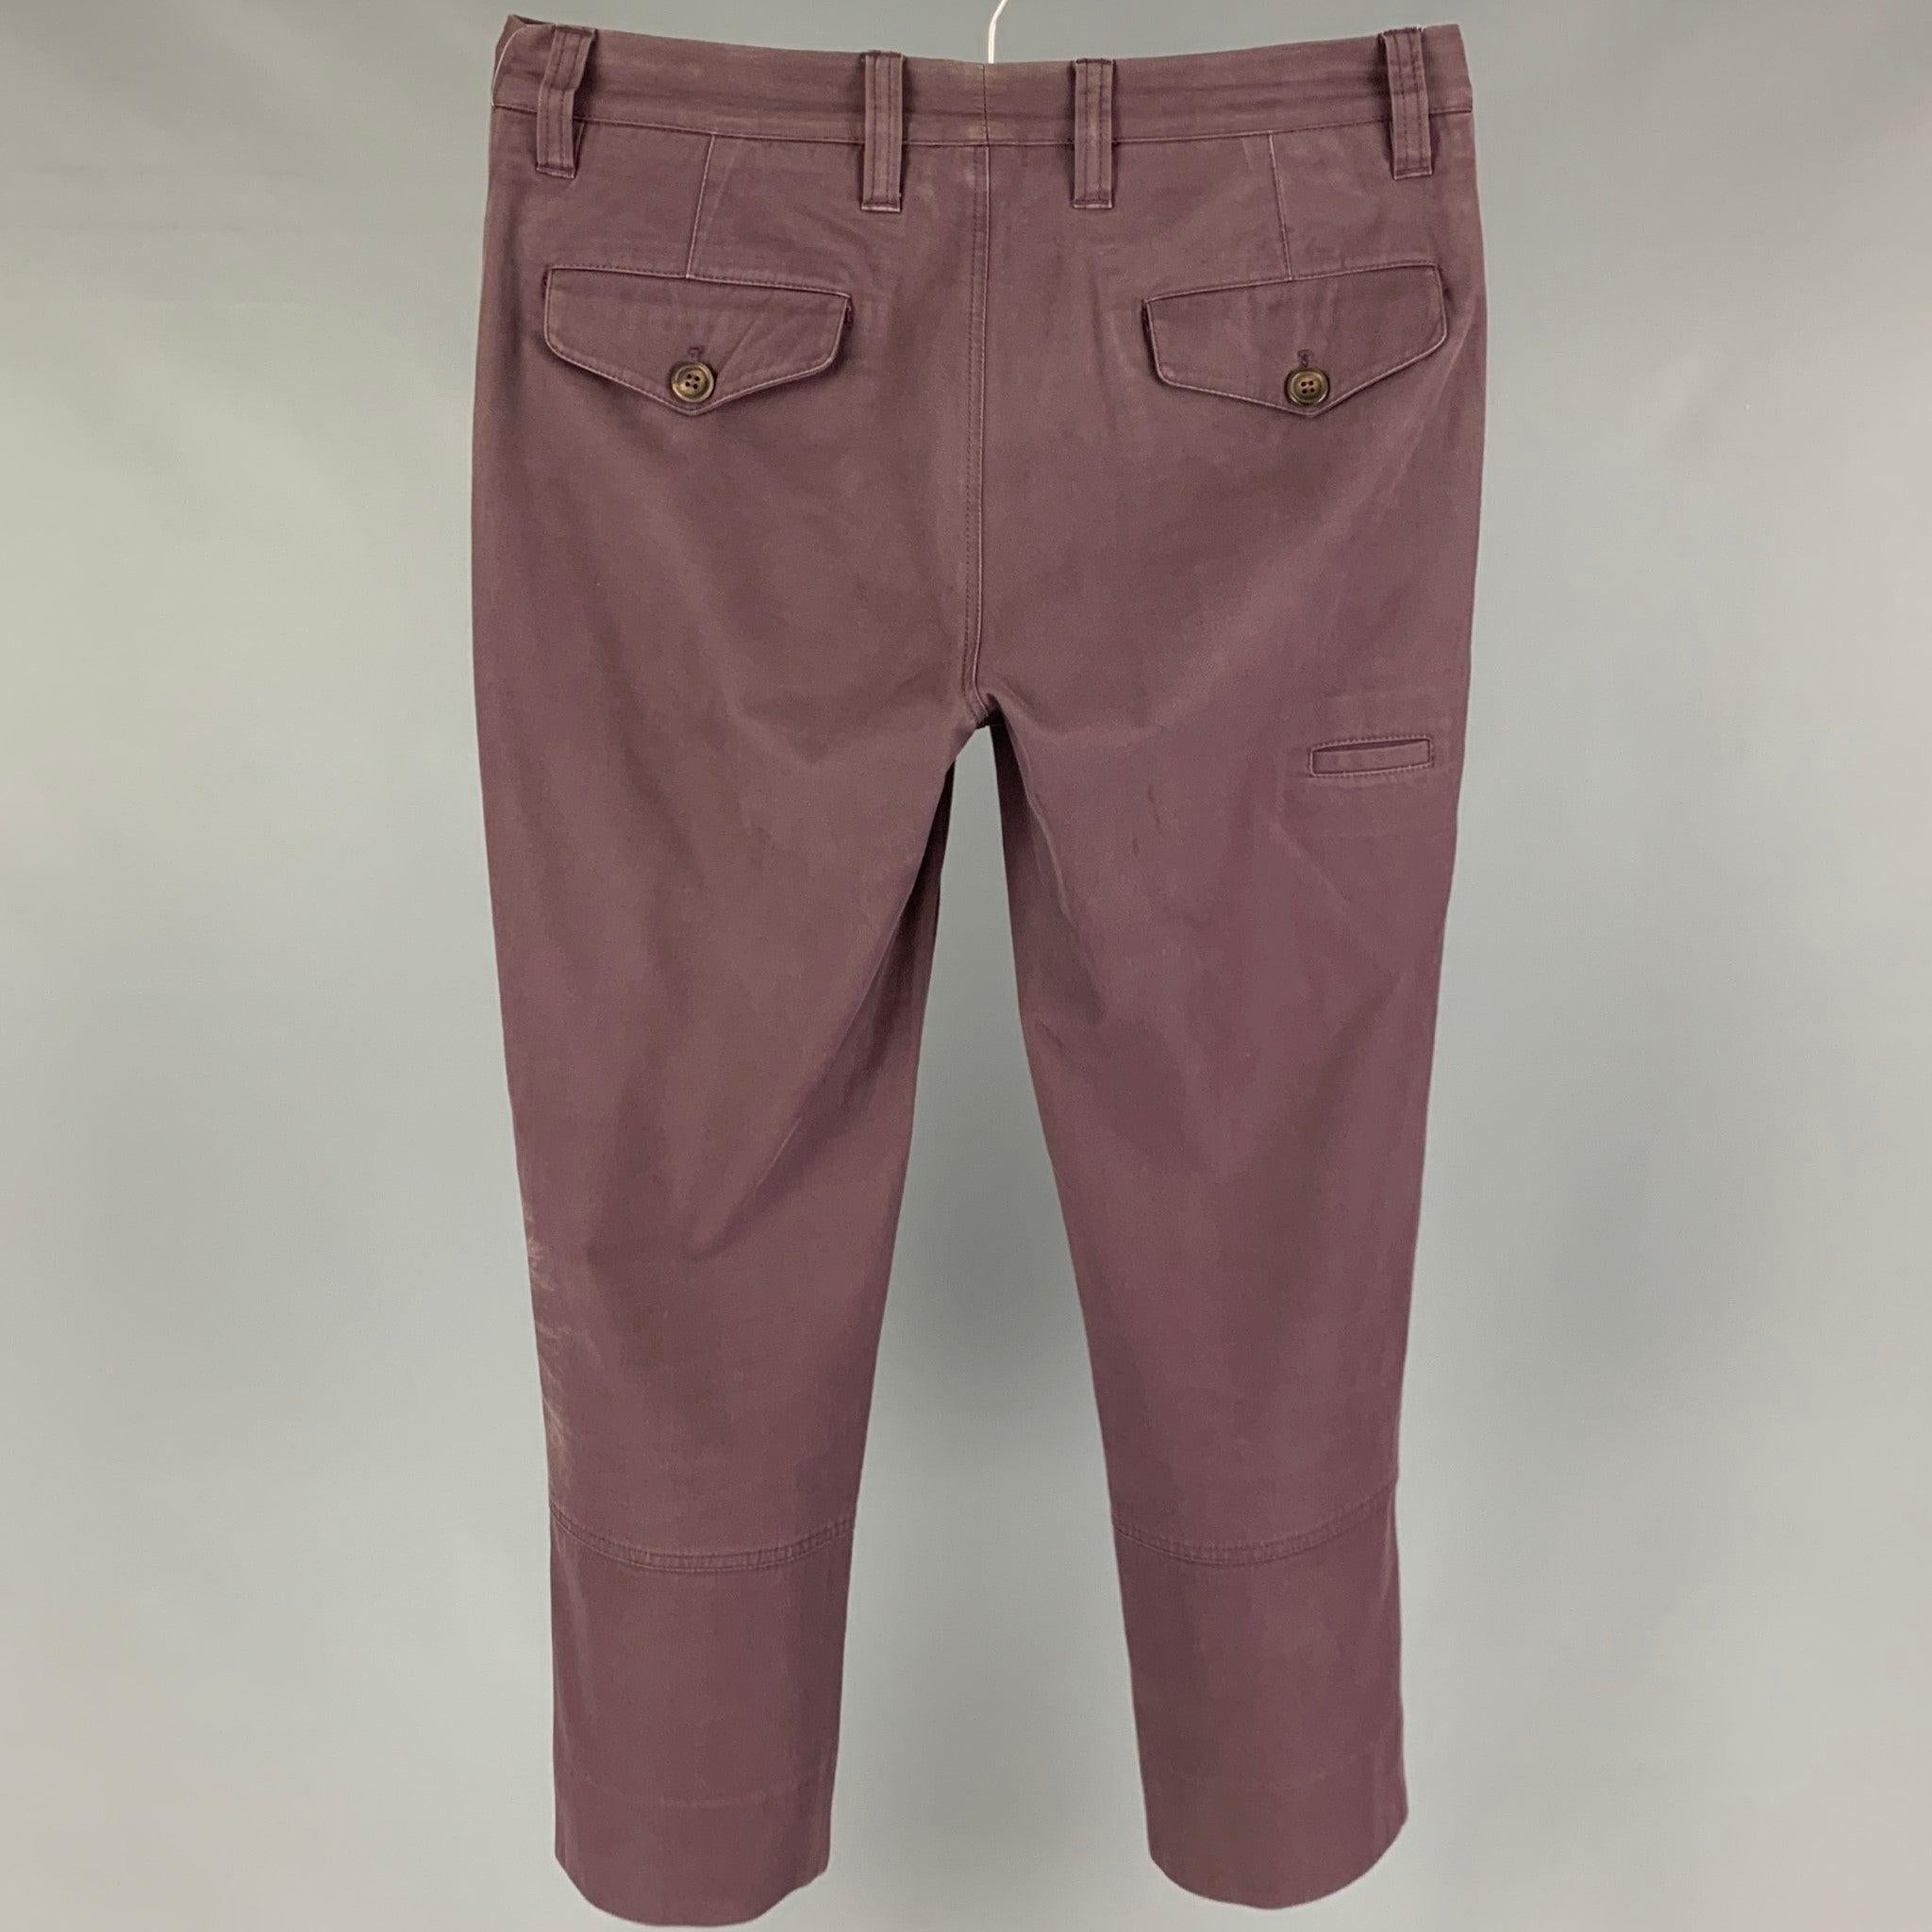 BRUNELLO CUCINELLI pants comes in a eggplant cotton featuring a flat front, slim fit, and a zip fly closure. Made in Italy.
Good
Pre-Owned Condition. Light wear. As-is. 

Marked:   46 

Measurements: 
  Waist: 32 inches  Rise: 9.5 inches Inseam: 26